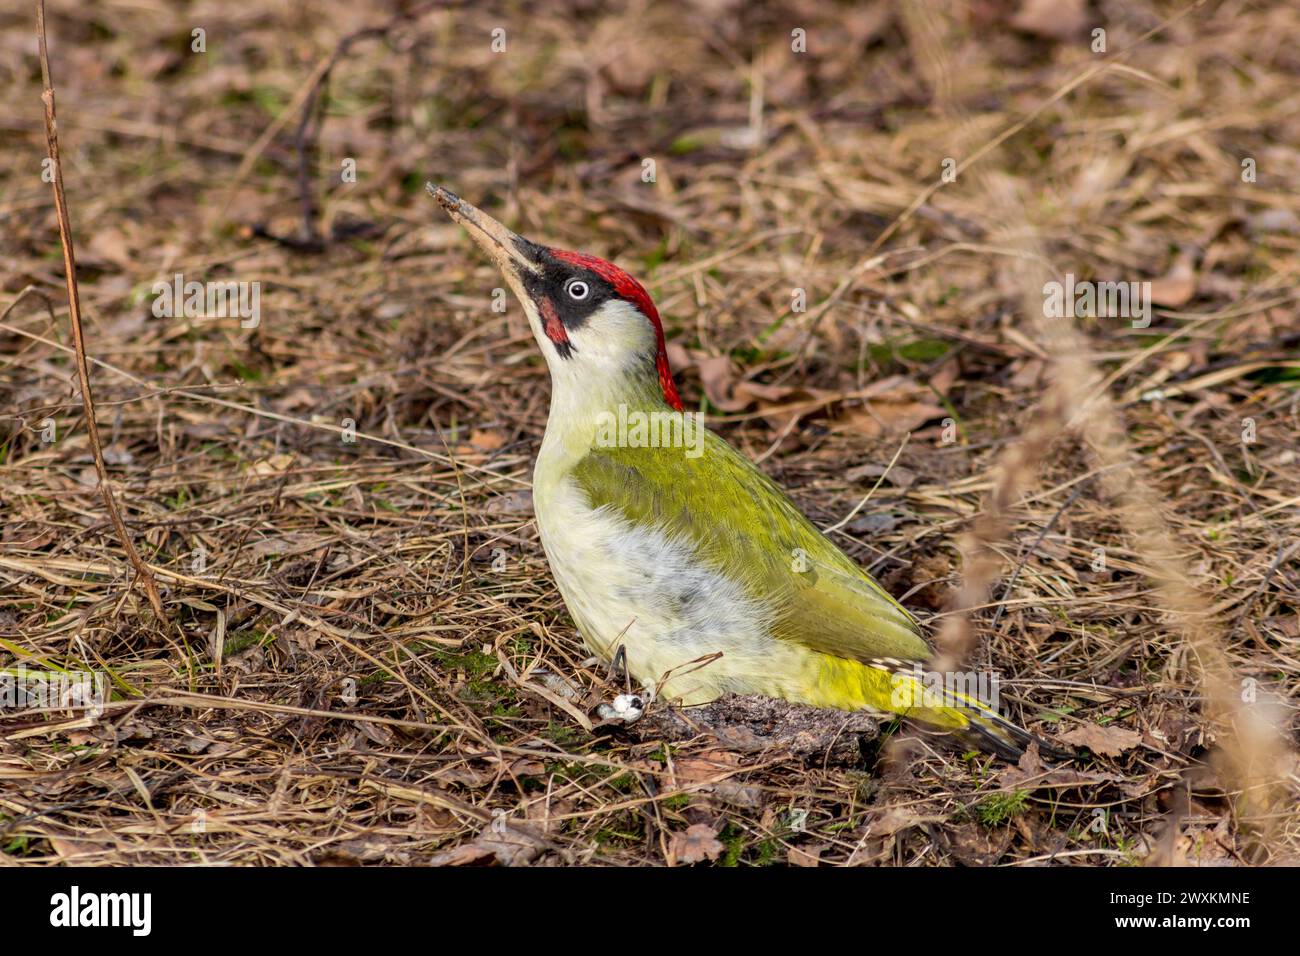 The male European green woodpecker (Picus viridis) feeds sitting on the ground in March Stock Photo